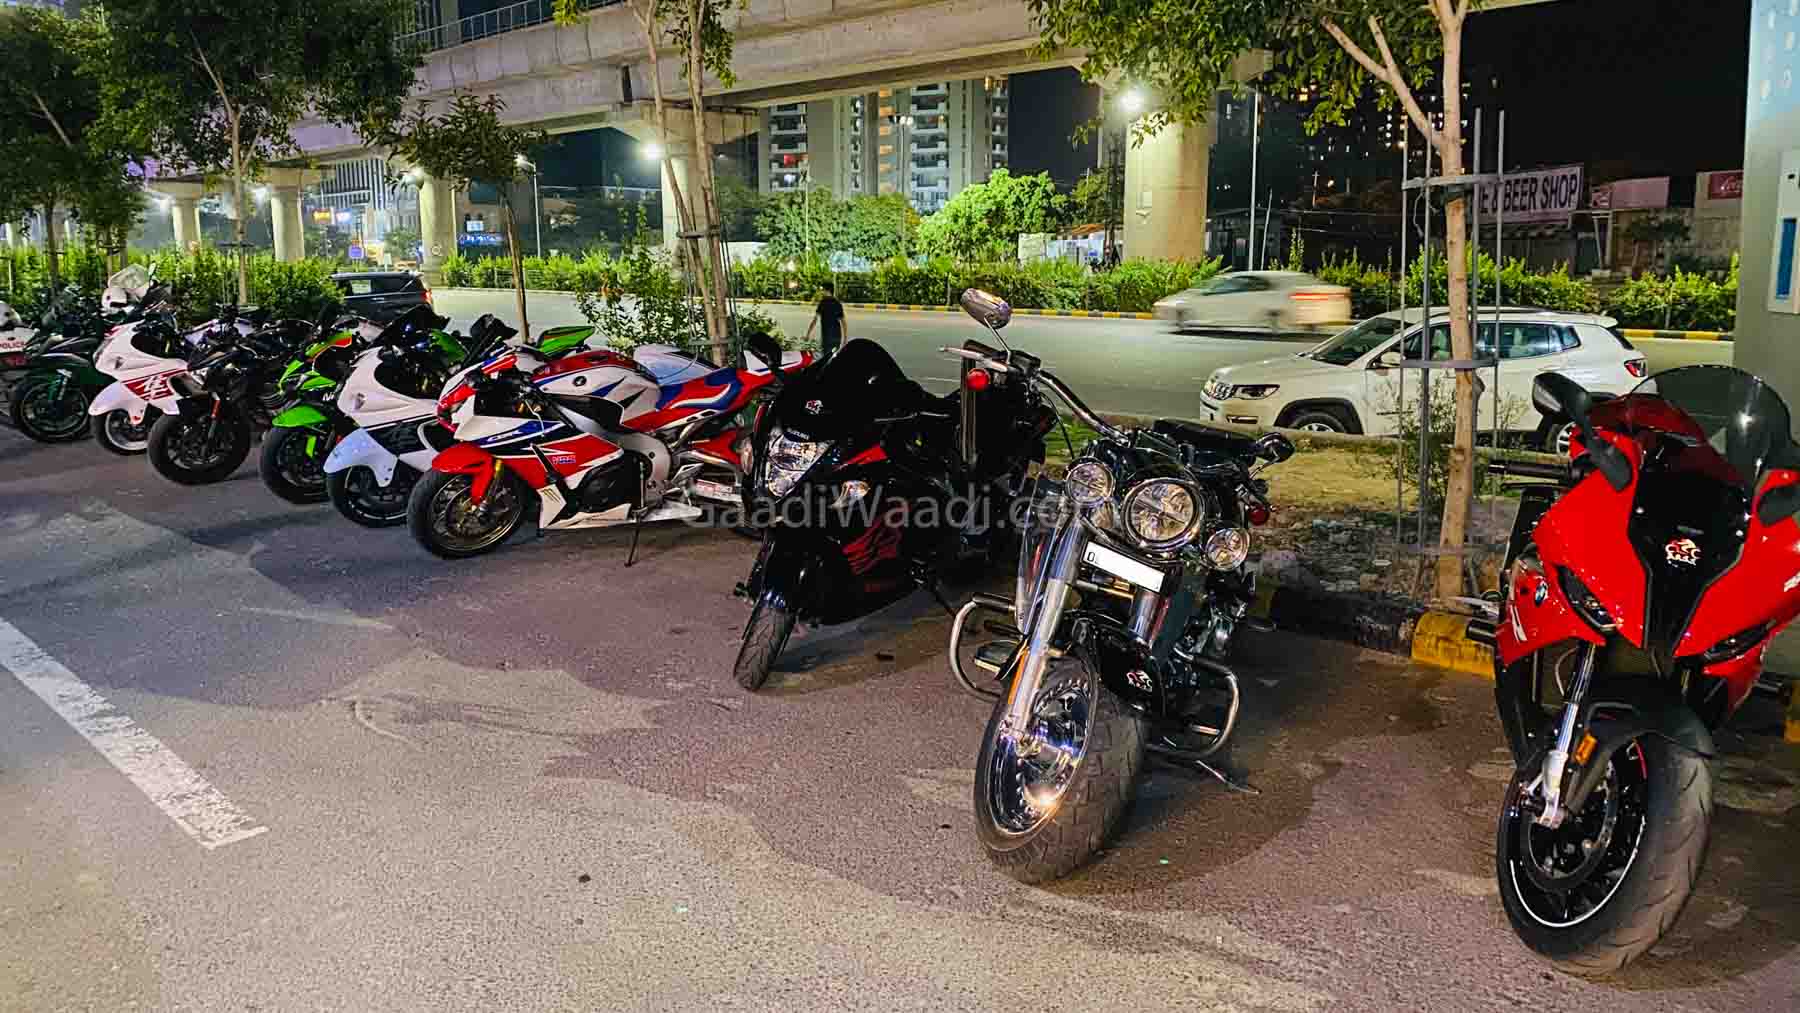 20 Super Bikes Impounded In Gurgaon And Fined Rs. 3.23 Lakh